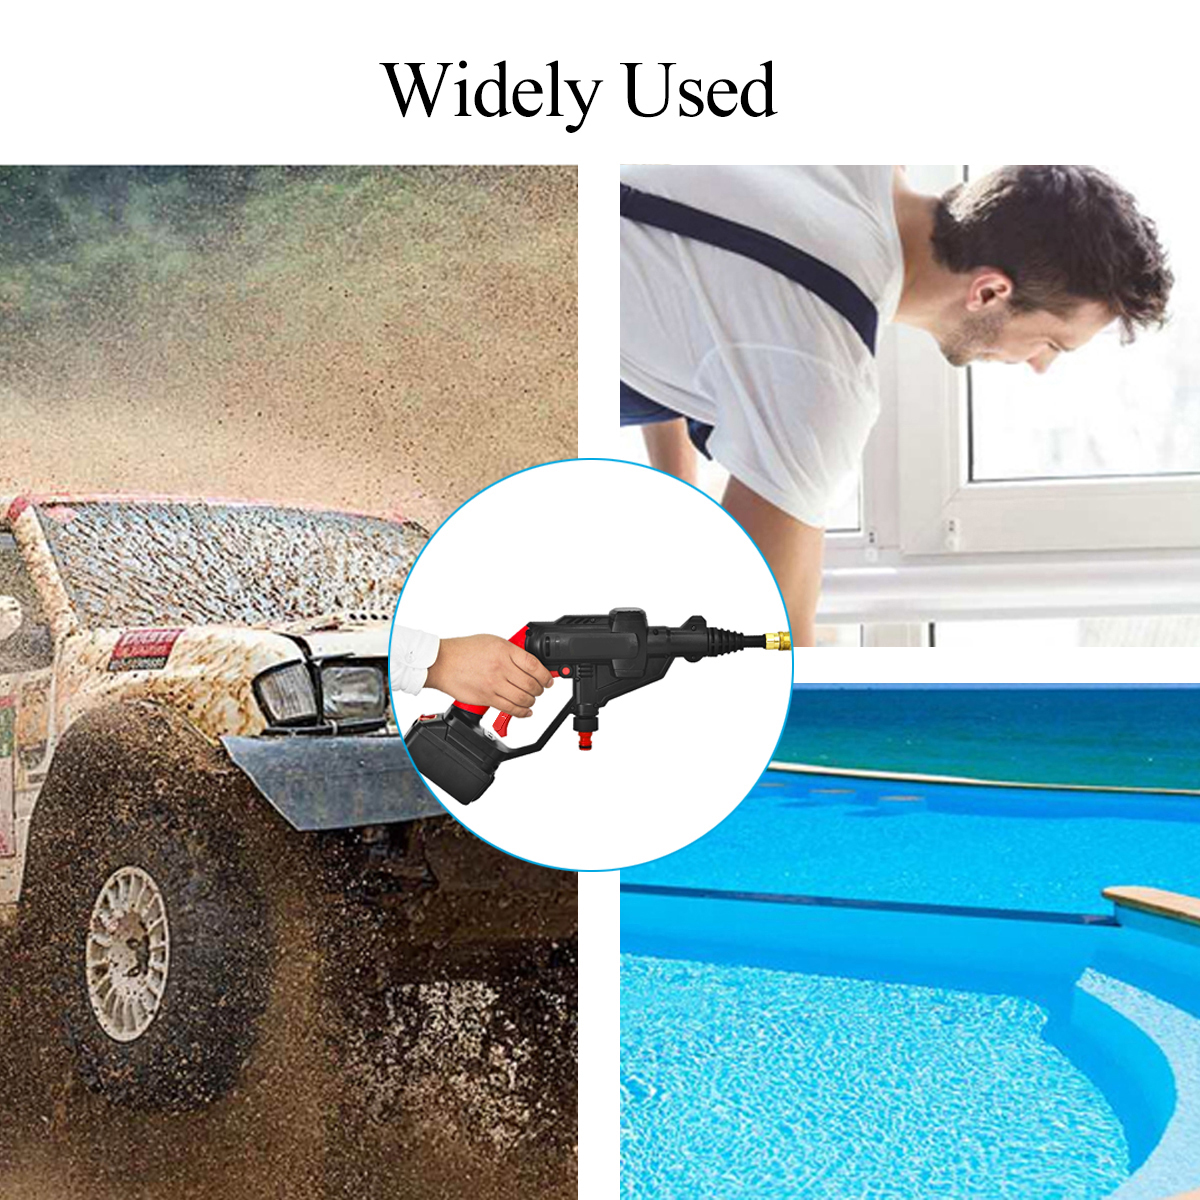 21V-Multifunctional-Cordless-Pressure-Cleaner-Washer-Sprayer-Water-Hose-Nozzle-Pump-with-Battery-1292573-2